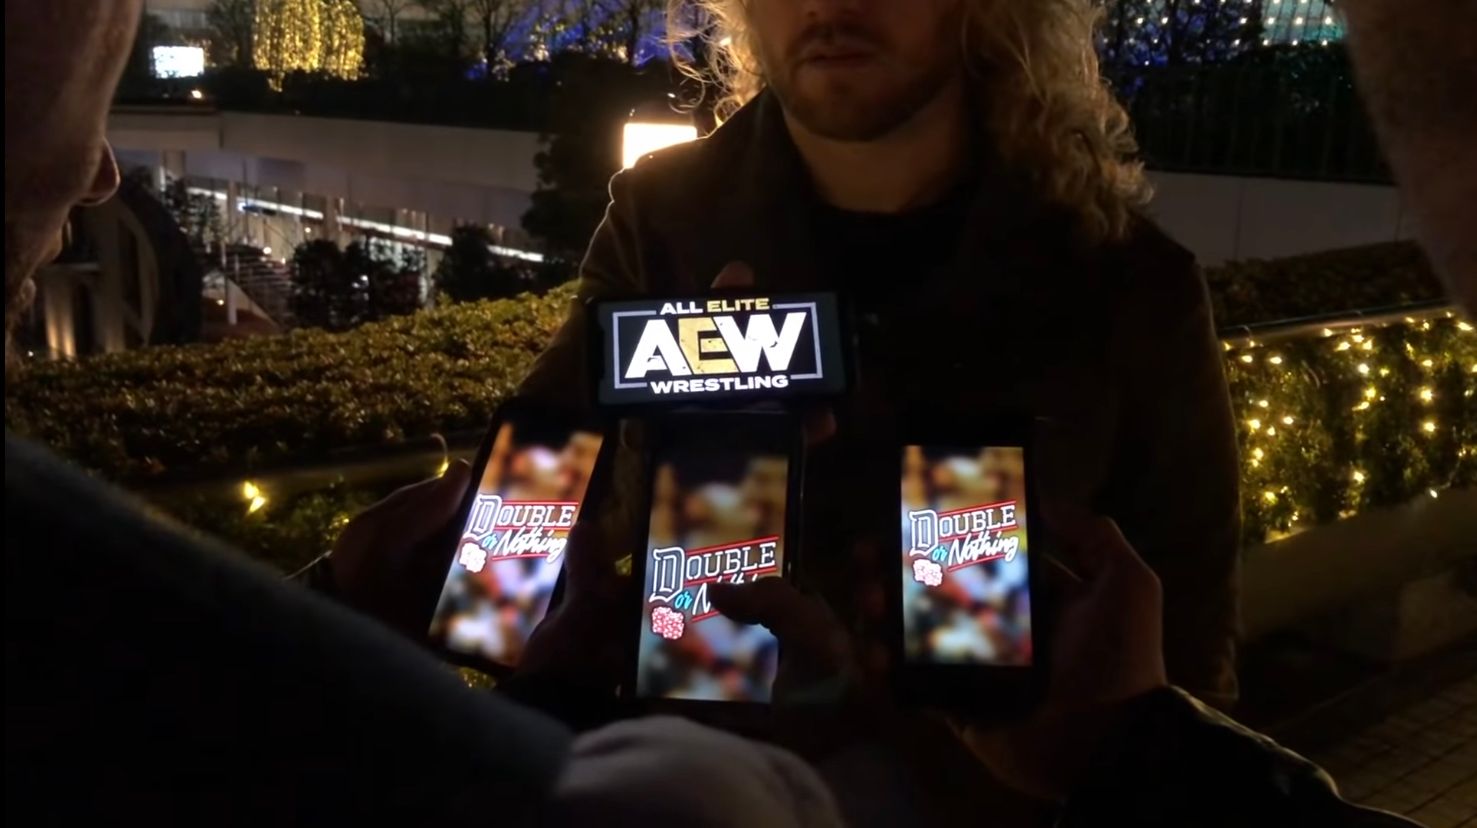 The unveiling of AEW and Double or Nothing's logos on BTE